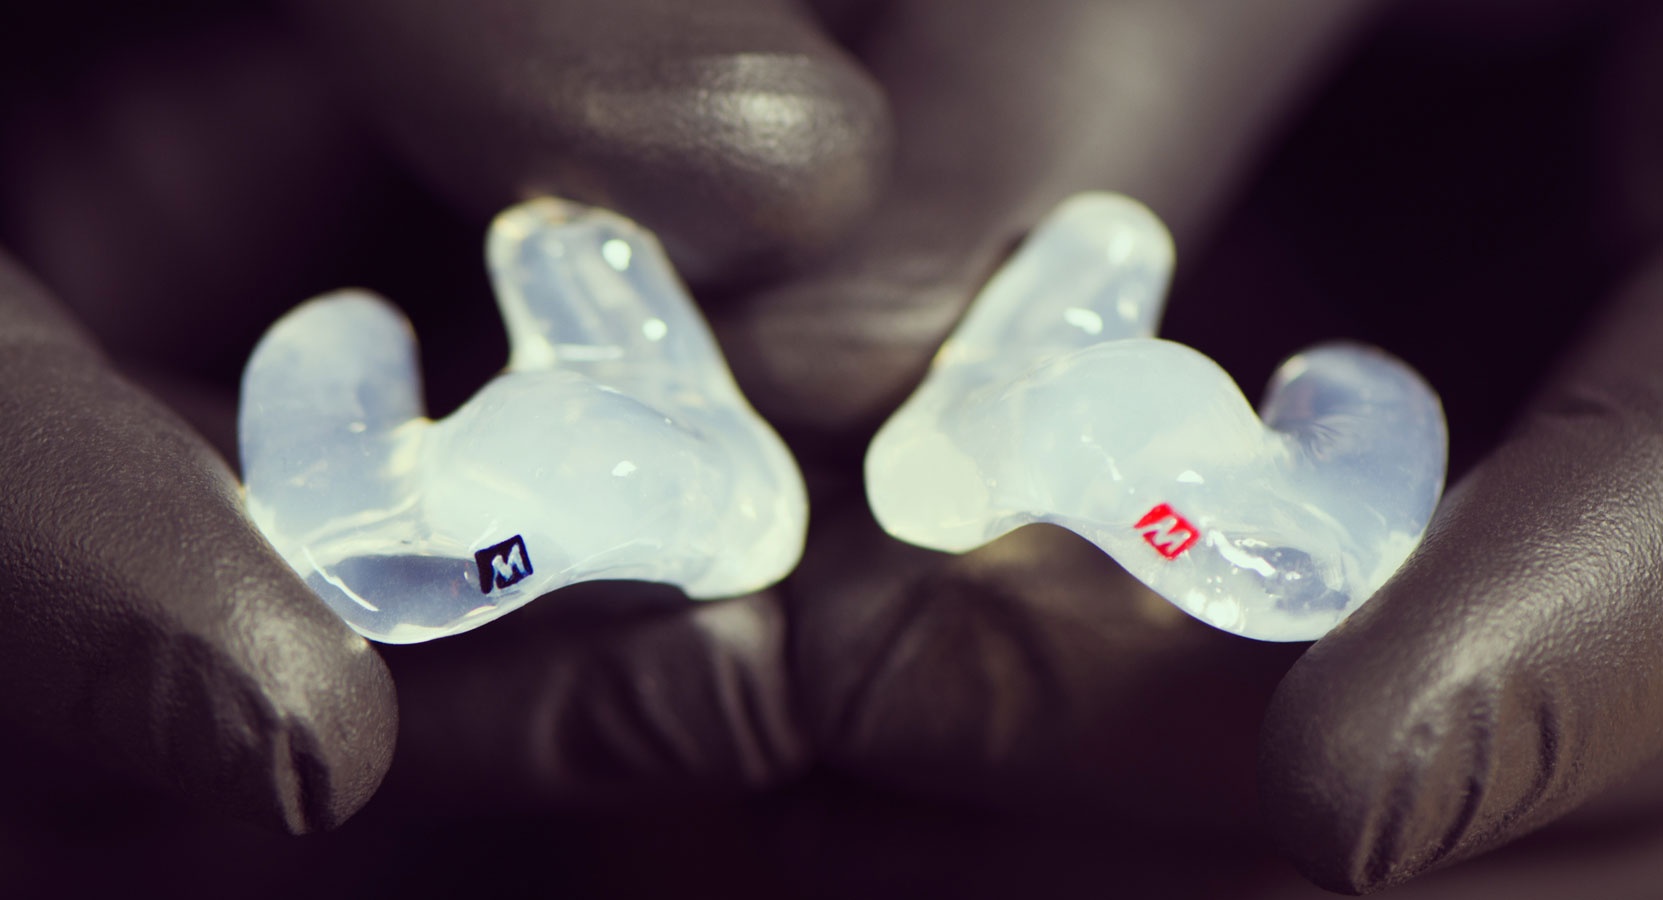 Hand wearing black nitrile gloves holding a pair of custom silicone eartips in clear color showing off the logos